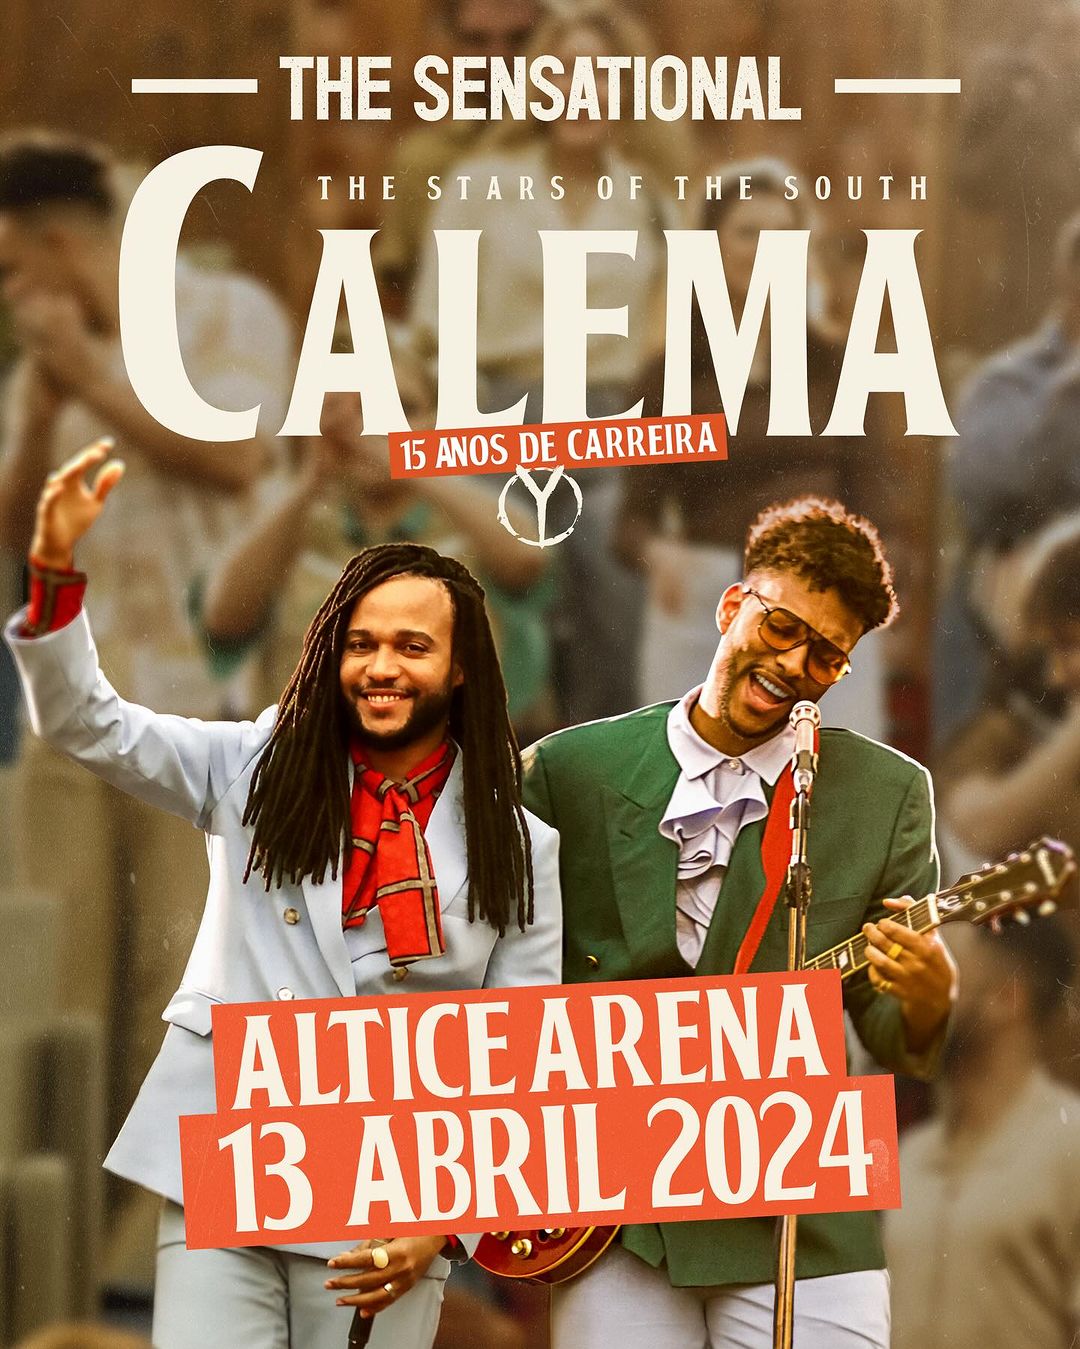 Calema’s 15-year career celebrated at Altice Arena on April 13